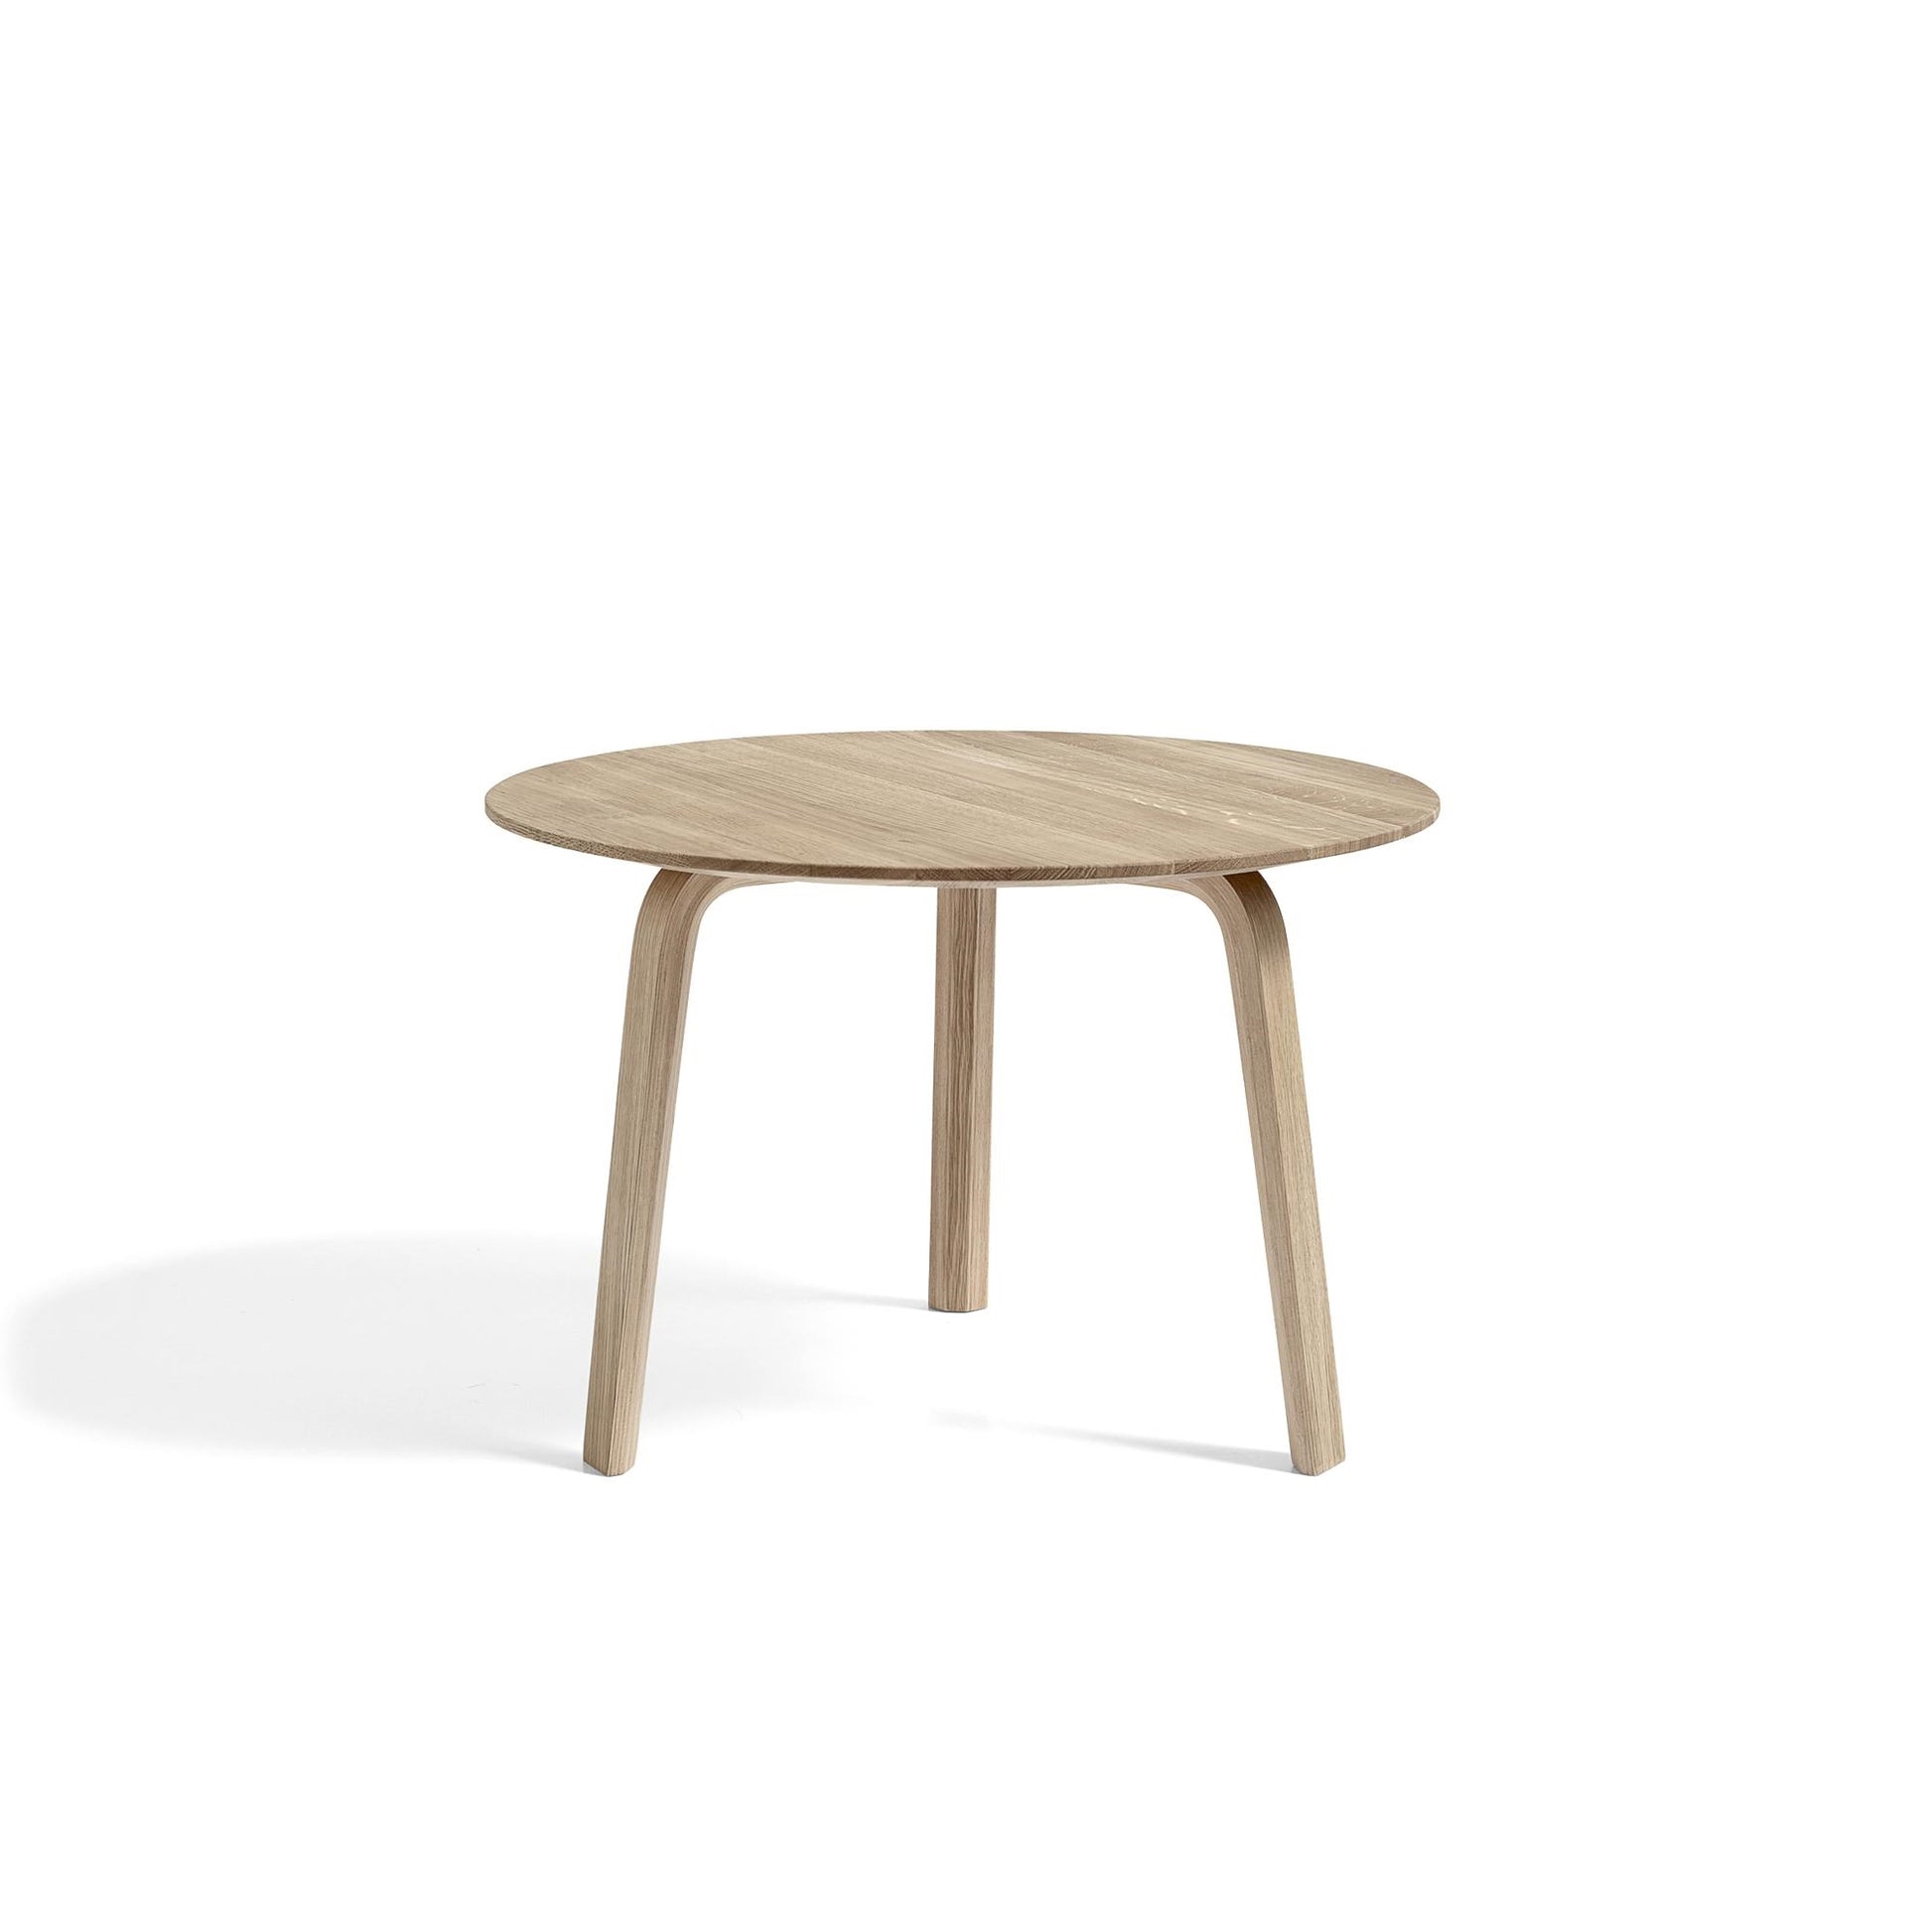 Bella Coffee Table Ø60 x H39 by HAY #Lacquered Oak